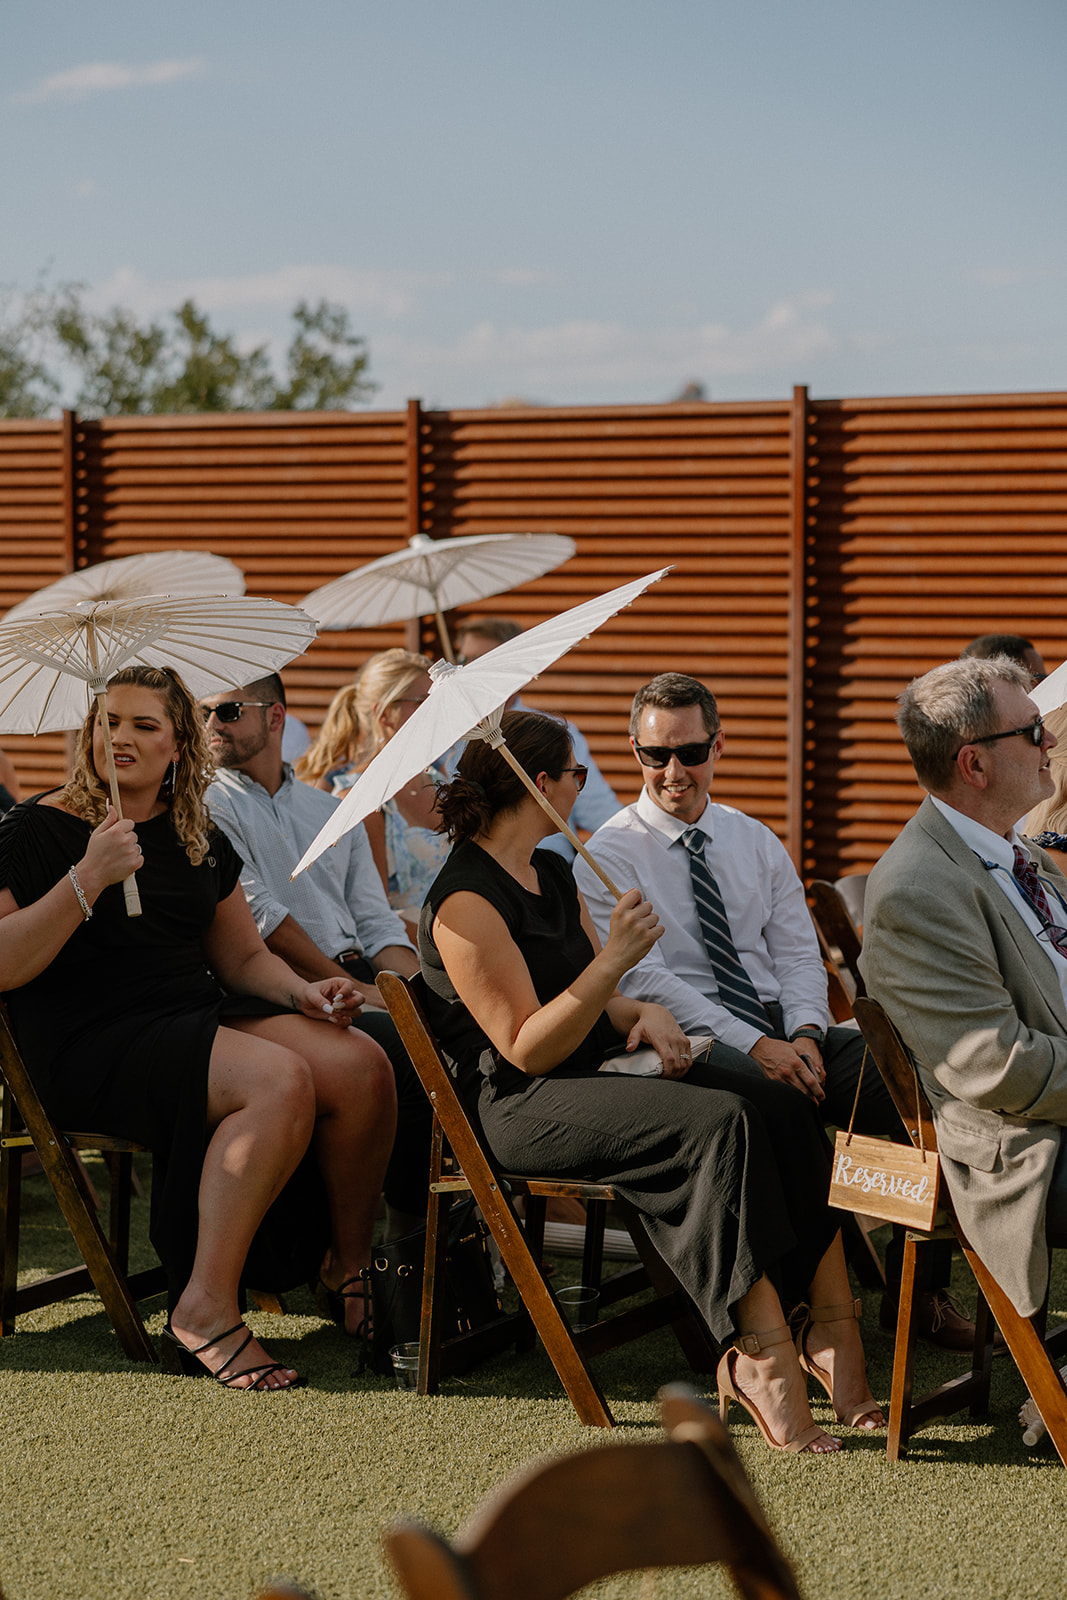 Guests sit and watch as the Arizona desert wedding takes place